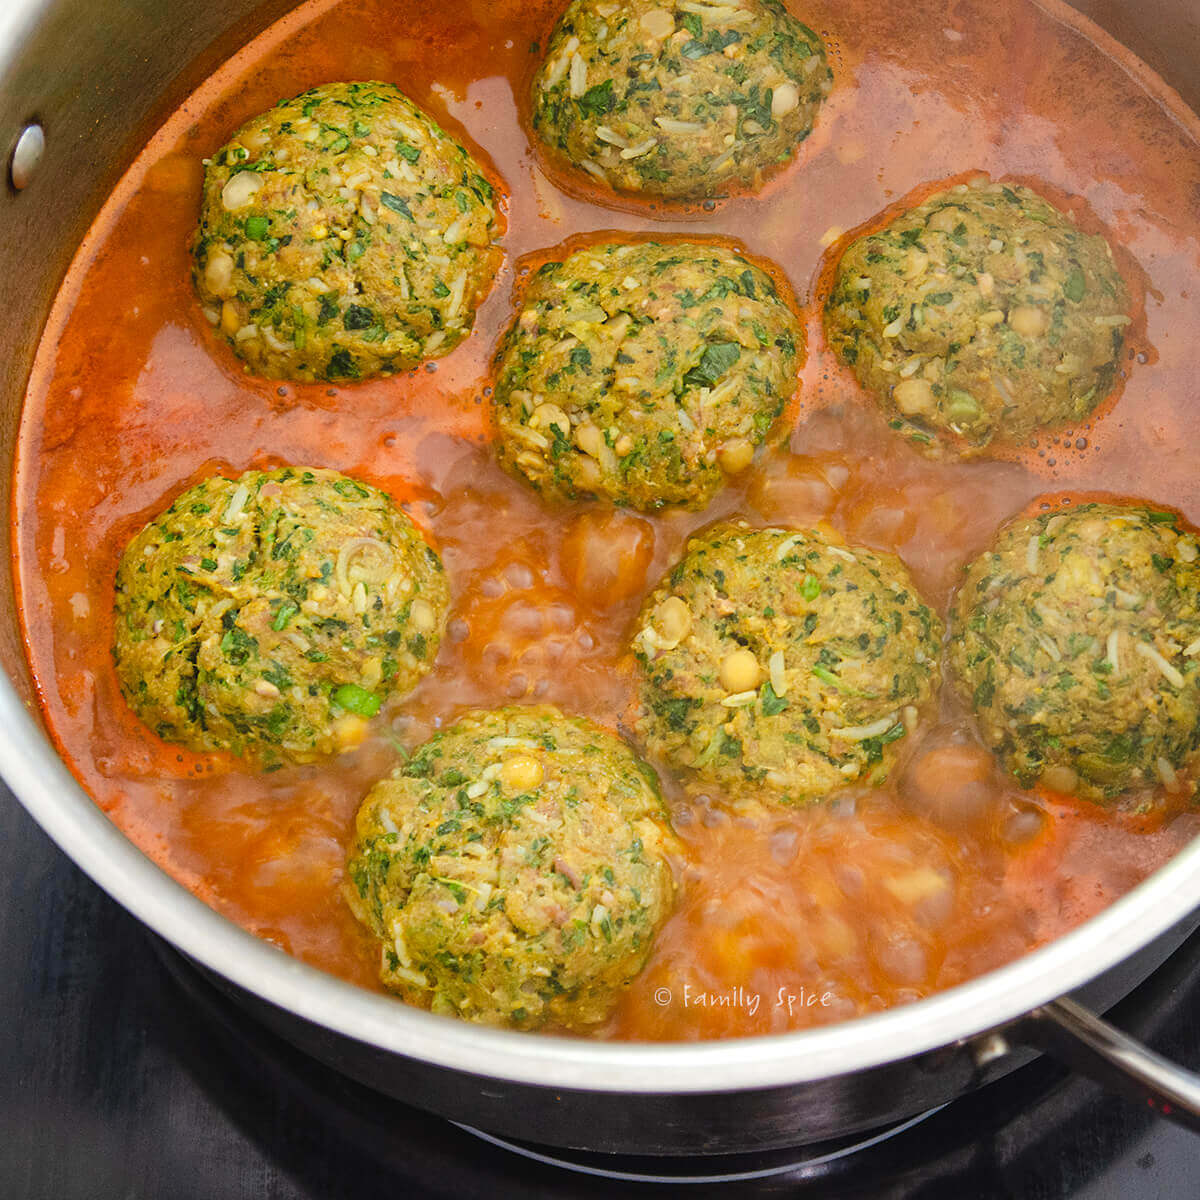 Raw Persian meatballs (koofteh berenji) added to hot tomato broth simmering in a stainless pot